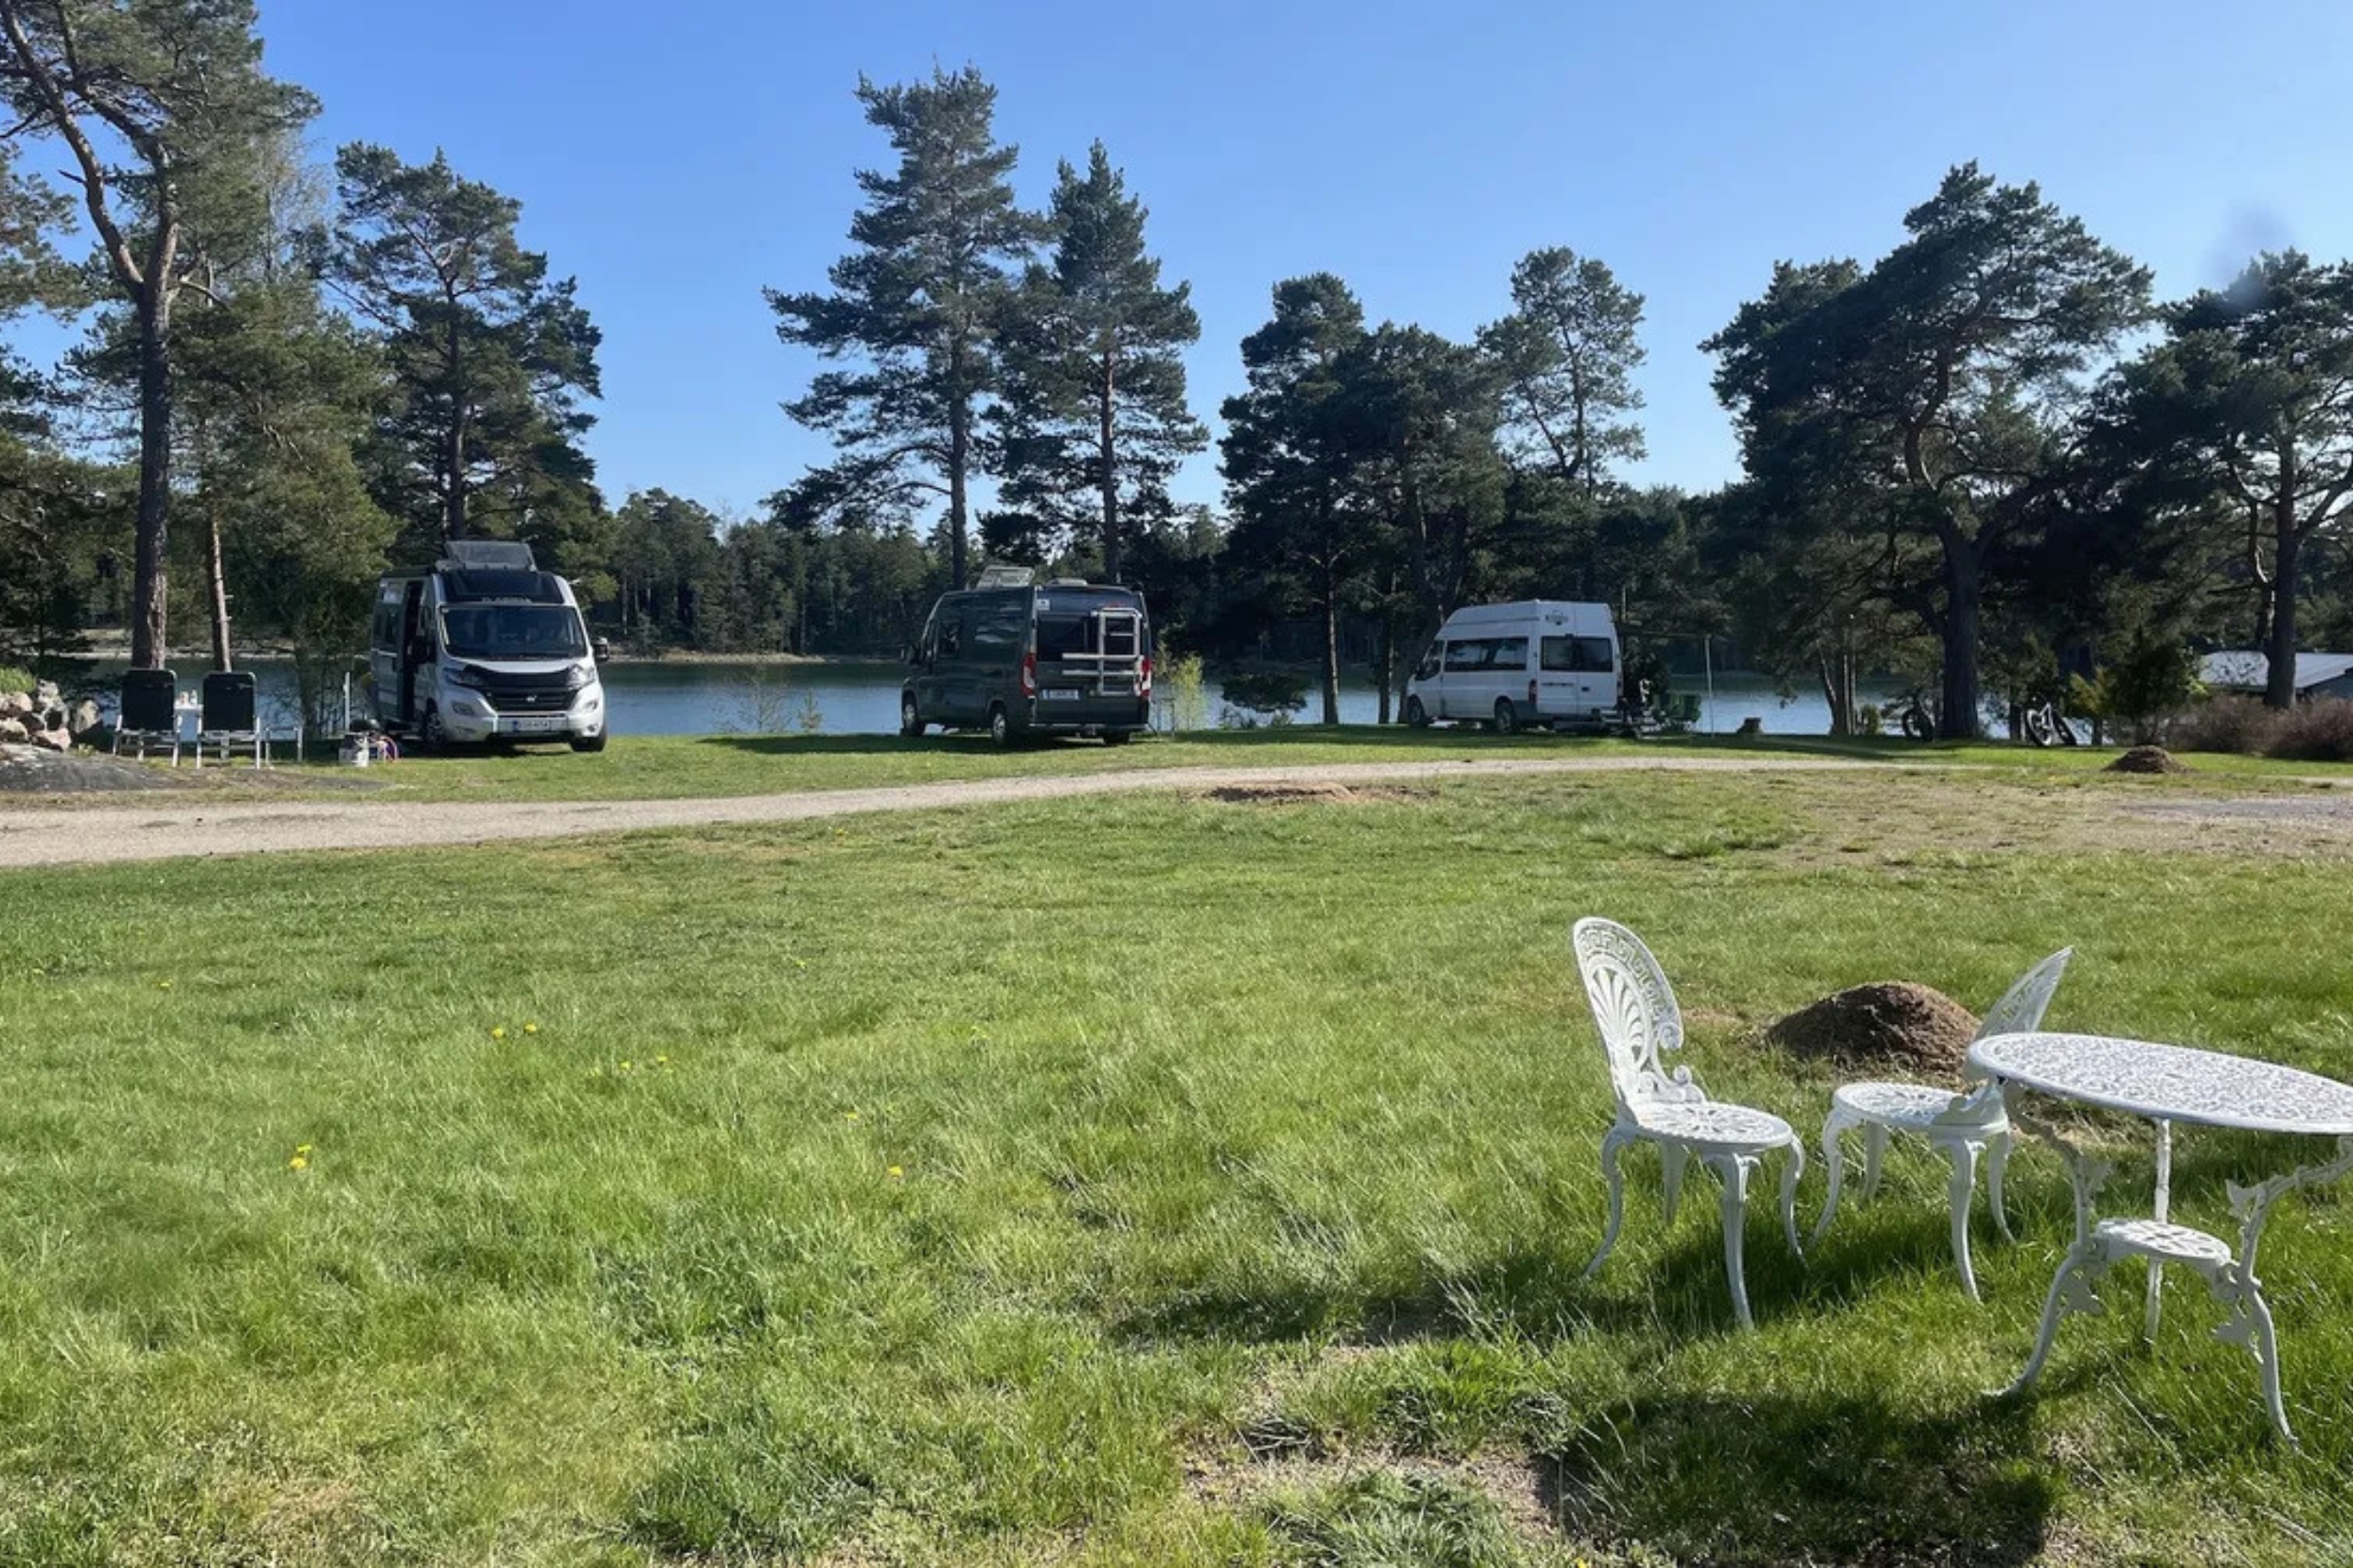 In the midst of Finnish nature and yet with good communications, the small Camping Kittuis is popular.